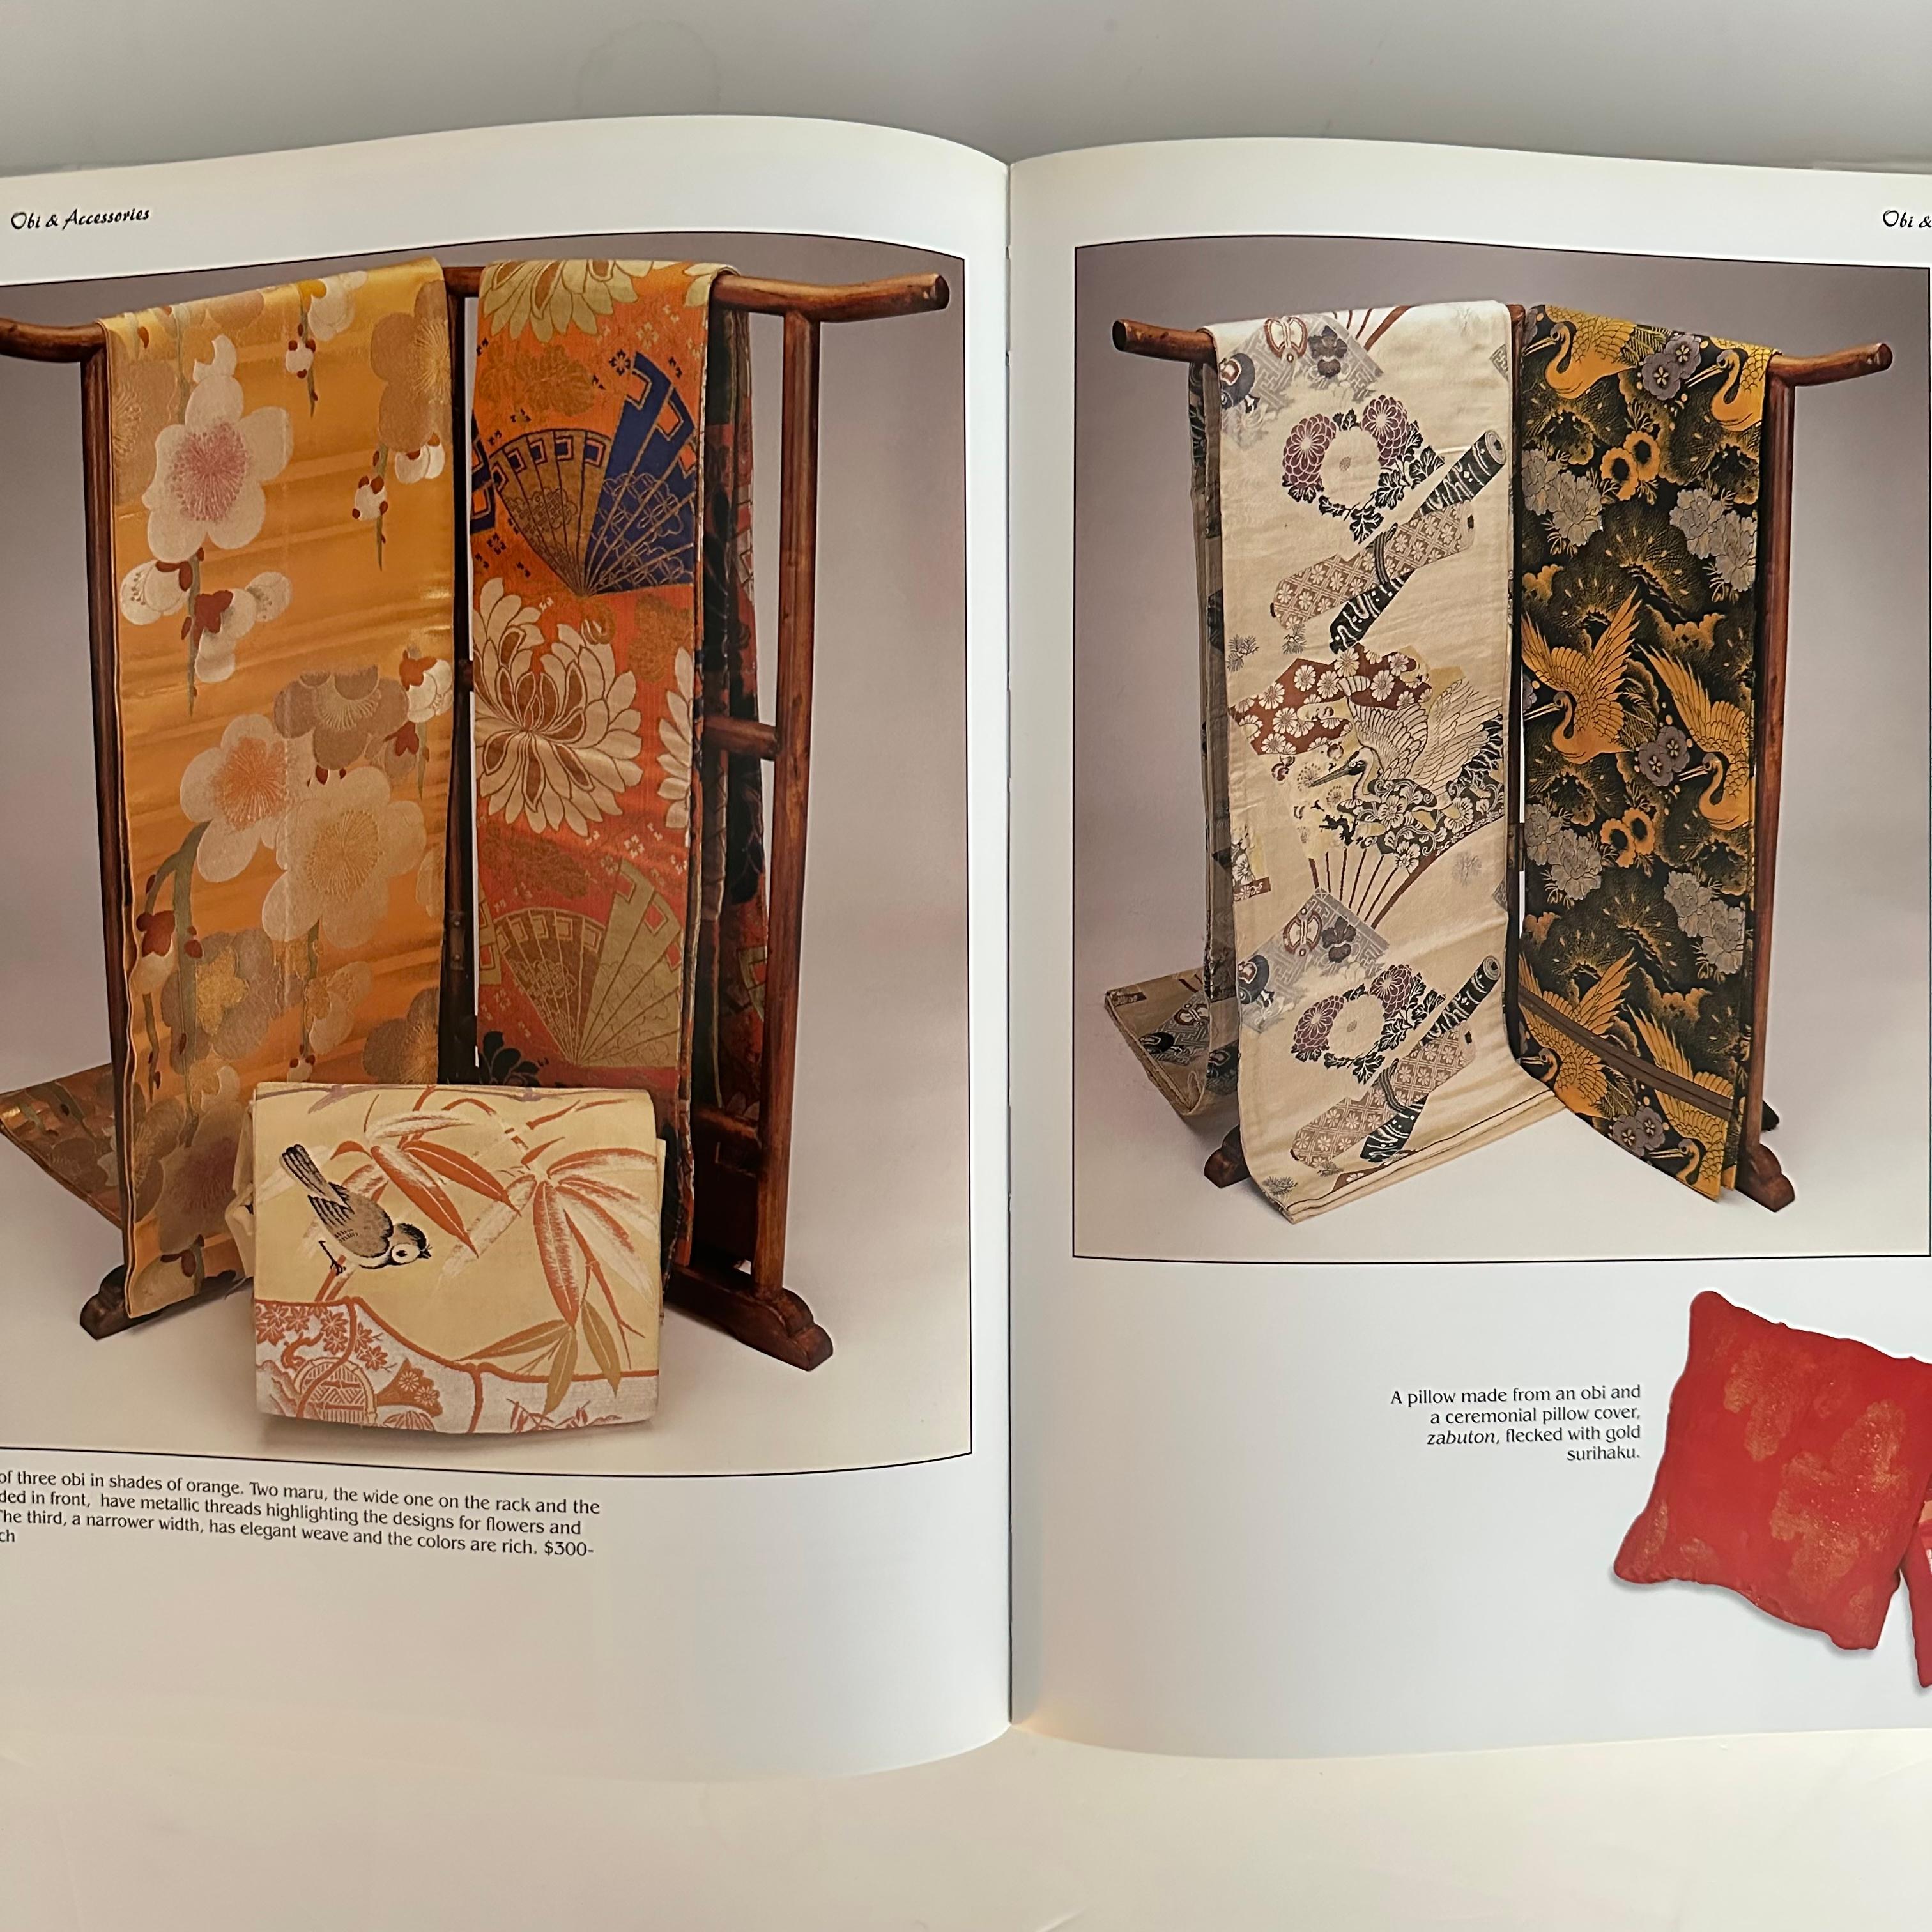 Published by Schiffer Books 1st edition, 2001. Hardback English text.

This lushly illustrated book is an authoritative tome written by the founders of Arise Inc. - the world’s largest supplier of vintage kimono, which in recent years have expanded